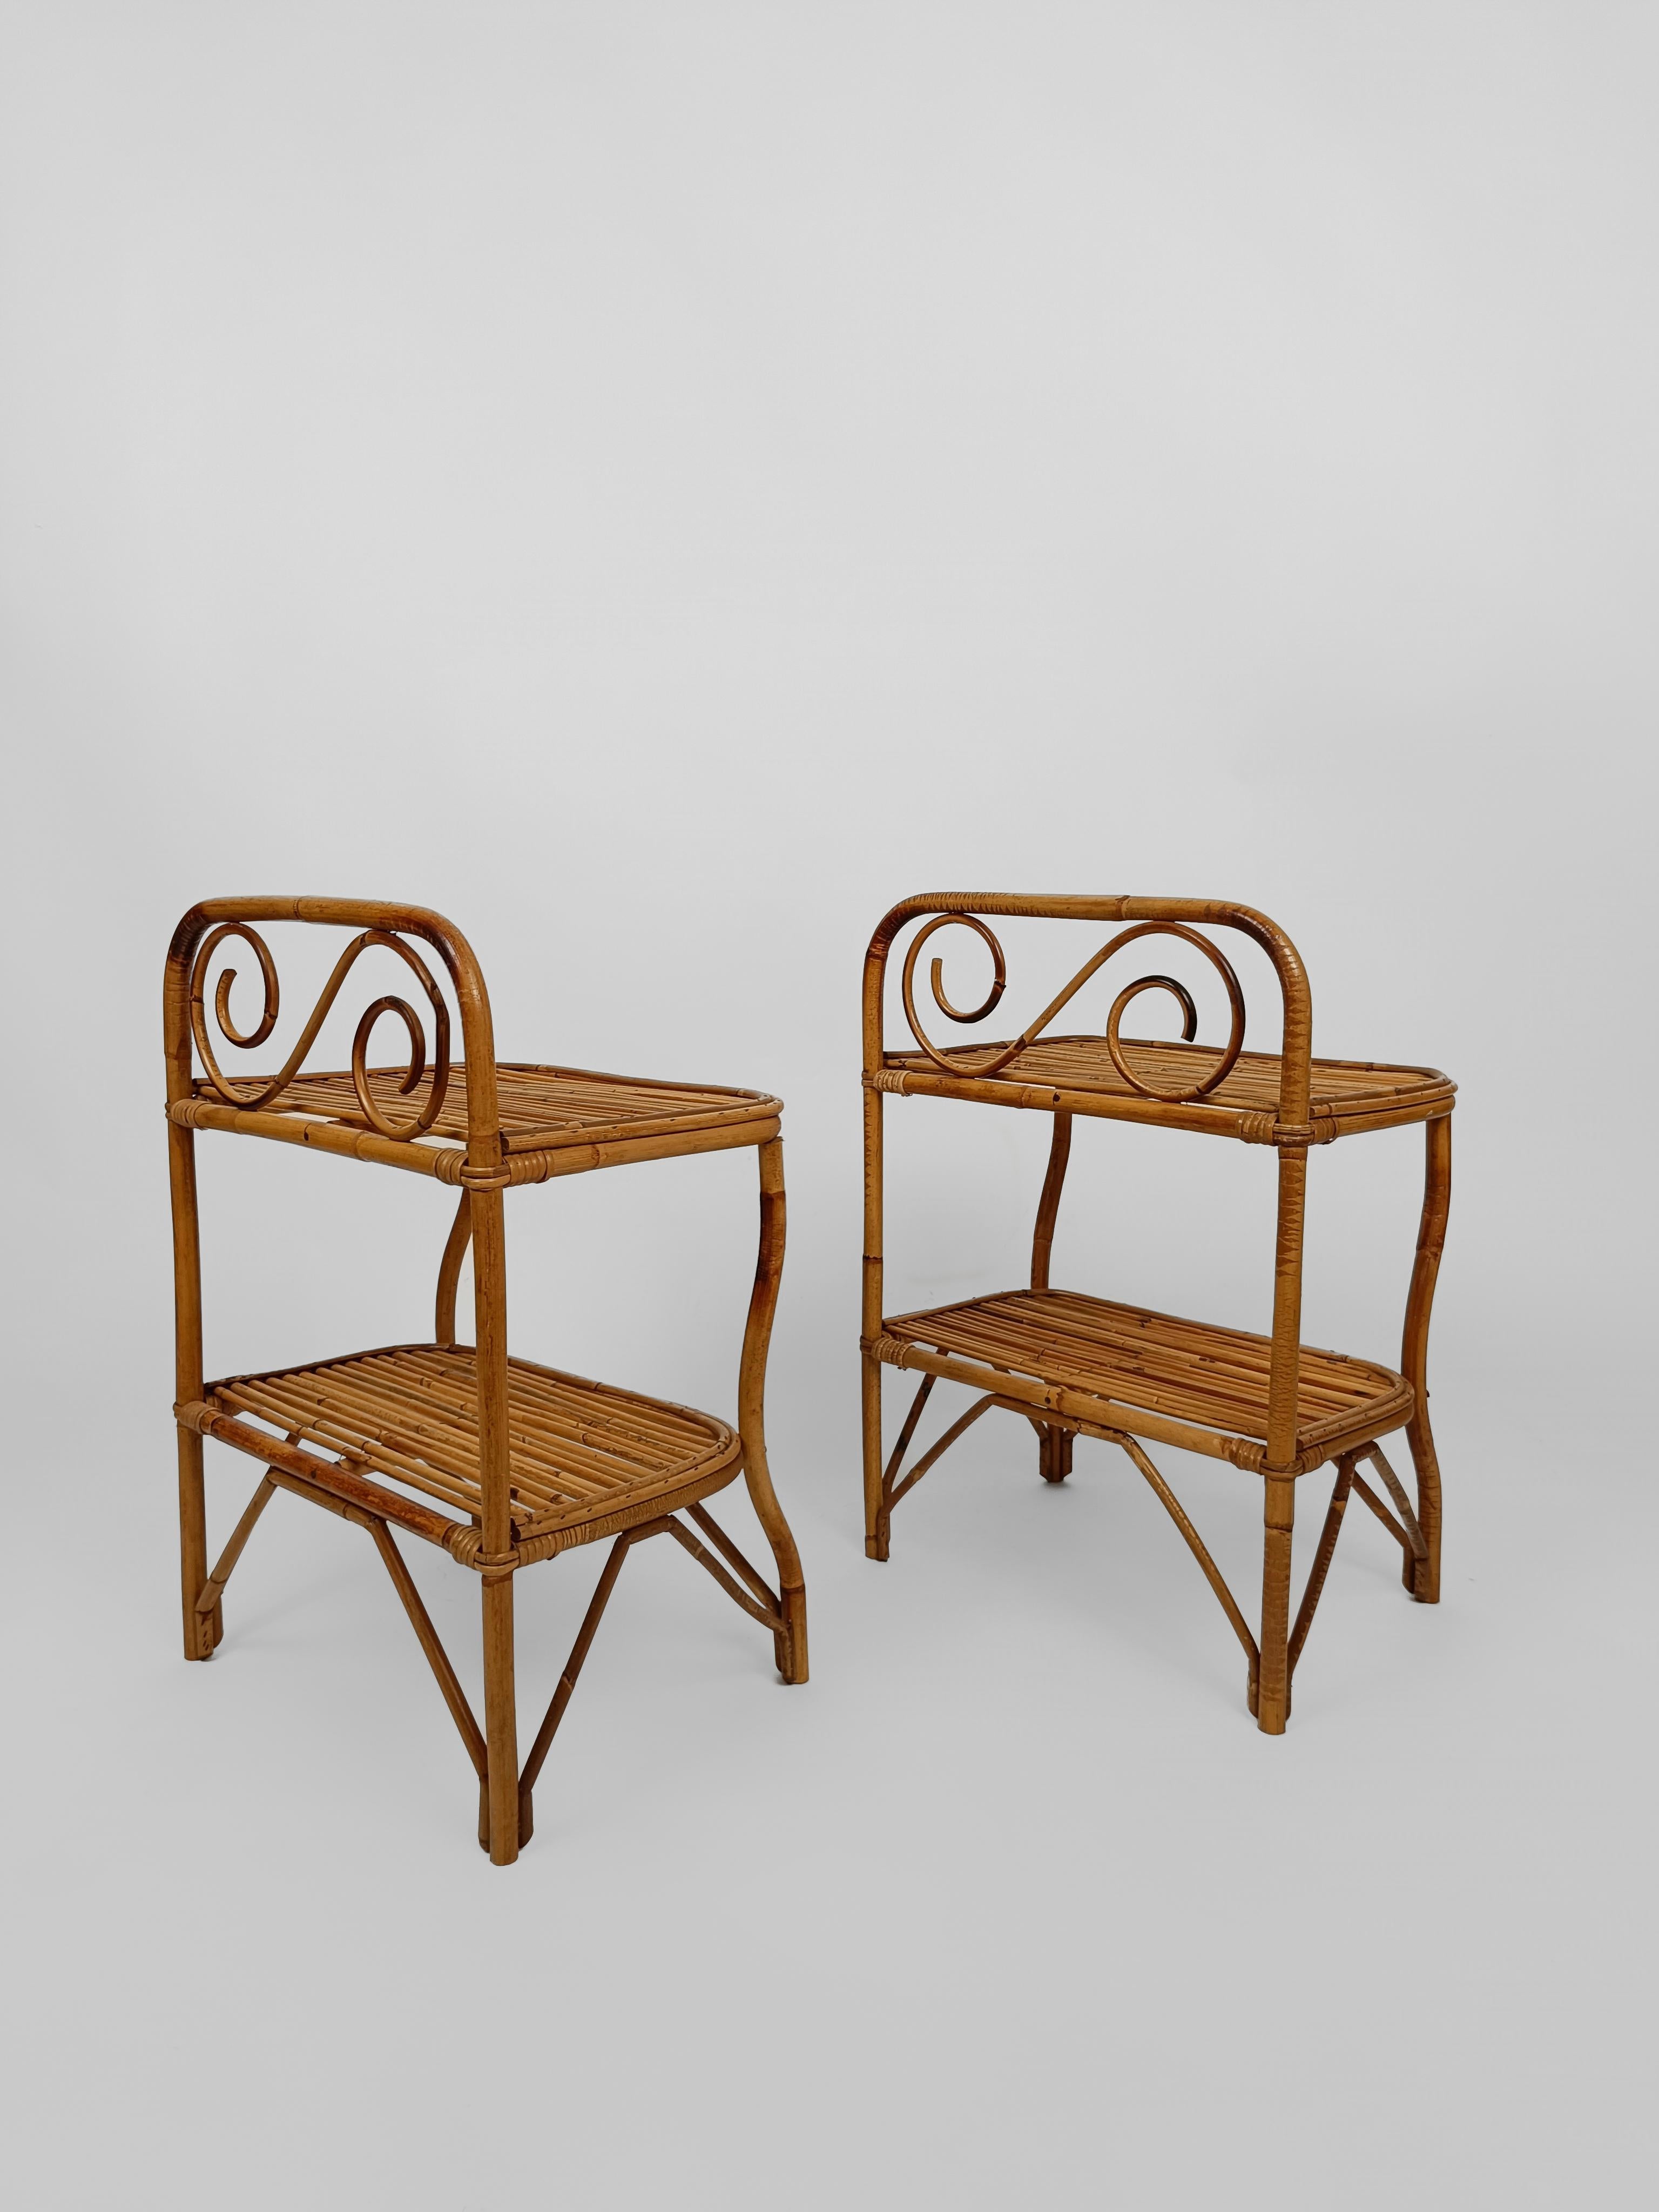 Pair of Italian Bedside Table Nightstands in Bamboo, Rattan and Cane, 1960s  For Sale 10